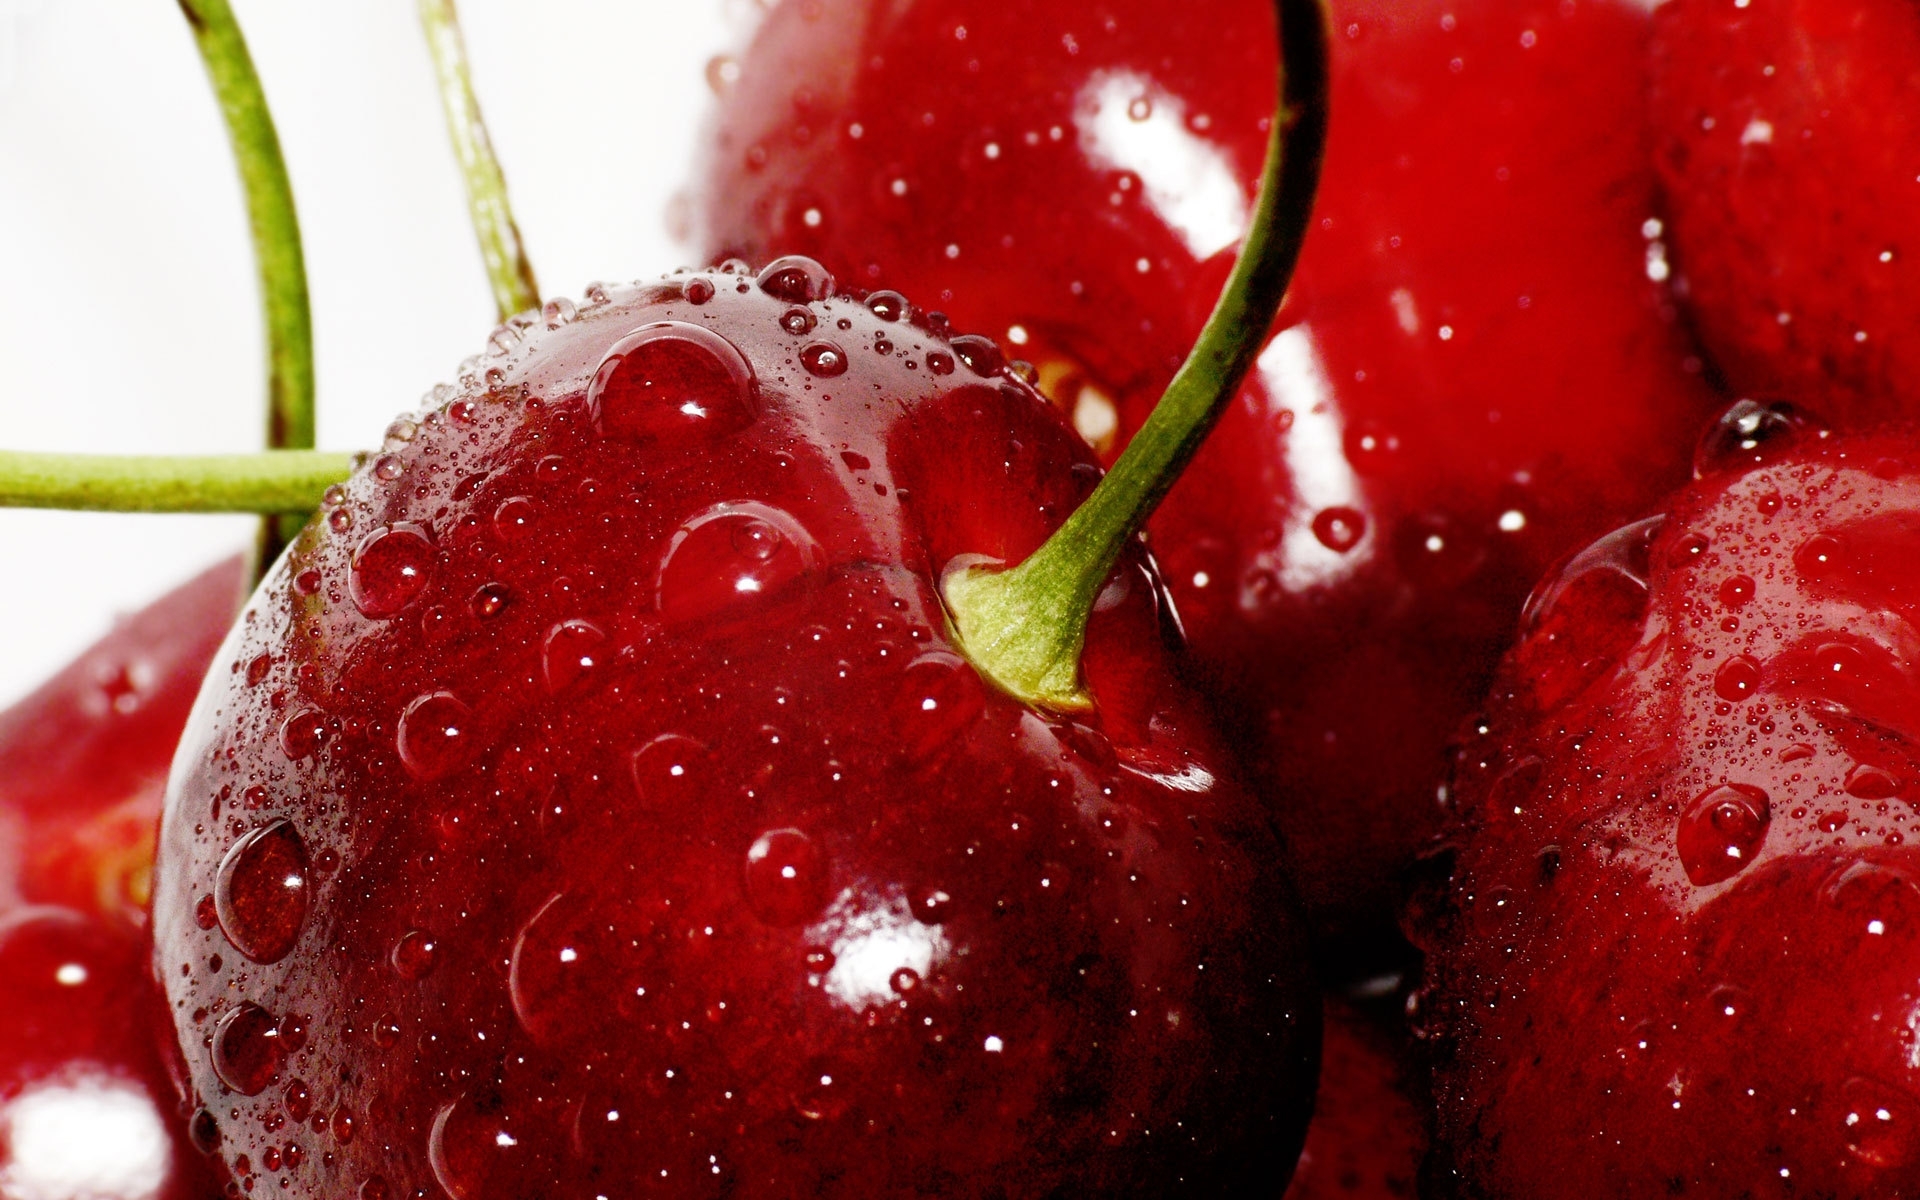 fruits, sweet cherry, food, red High Definition image